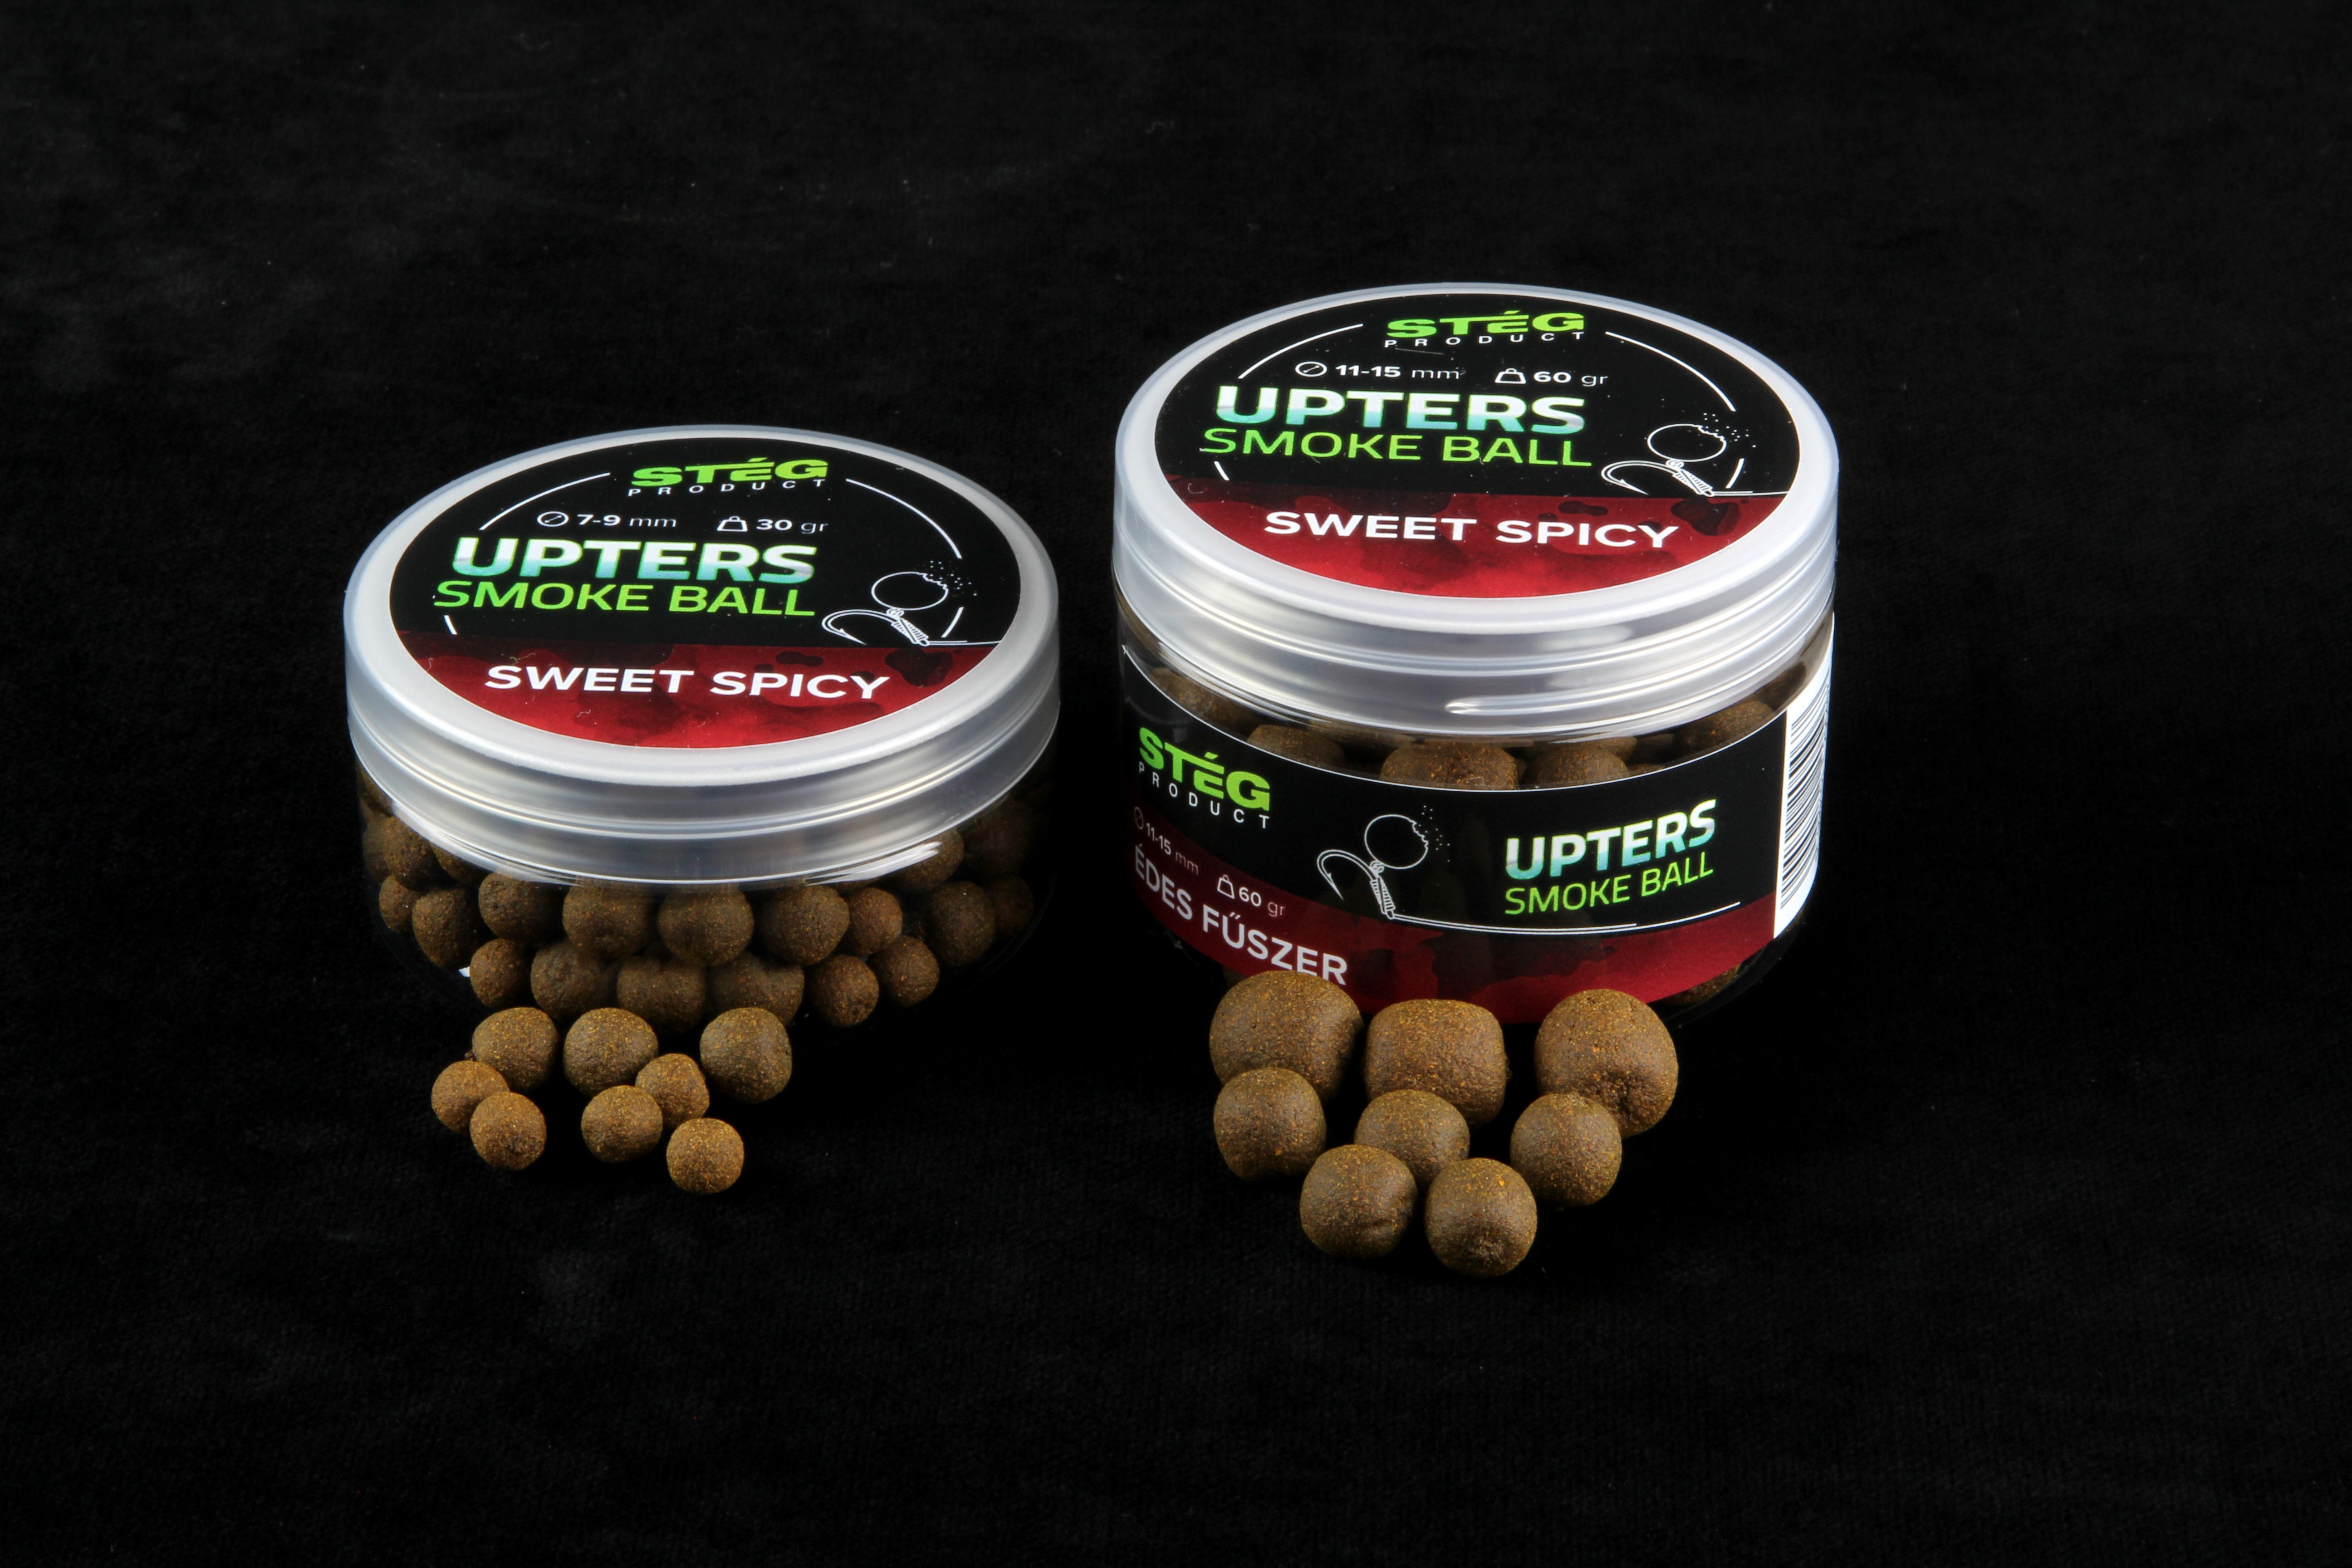 STÉG PRODUCT UPTERS SMOKE BALL 7-9MM SWEET SPICY 30G